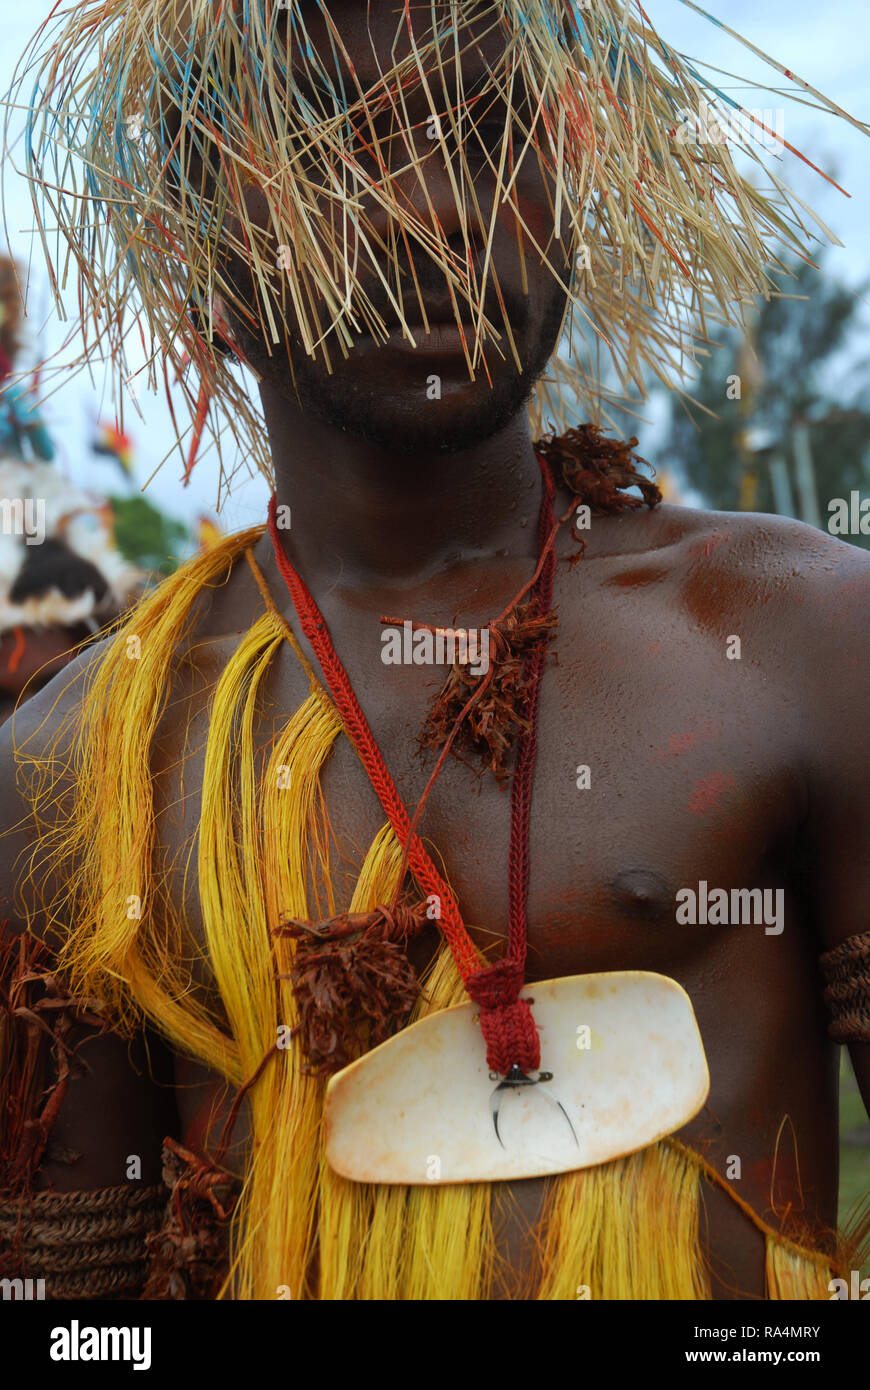 Colourfully dressed and face painted man wearing a straw hat as part of a Sing Sing in Madang, Papua New Guinea. Stock Photo